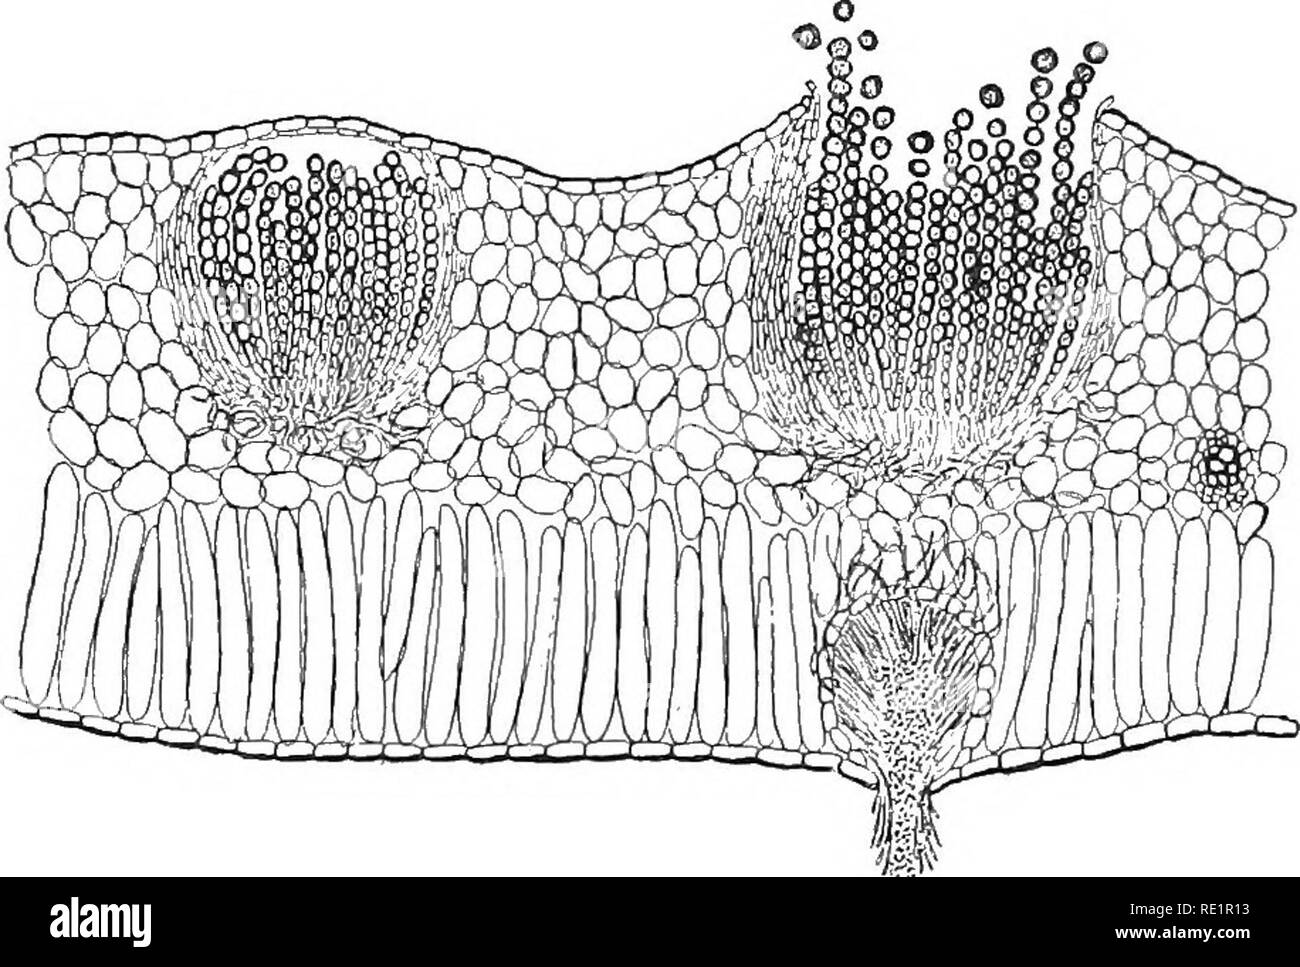 . Nature and development of plants. Botany. 252 DEVELOPMENT OF A RUST bodies which rupture the epidermis and finally open out into cups filled with chains of yellowish spores. An examination of Fig. 162 shows that these spores are formed in rows at the end of hyphae and surrounded by a layer of rather thick-walled hyphae. This stage of the rust is known as the cluster cup or aecial stage and the spores are called aeciospores. Often smaller spore-bear-. FiG. 162. Cluster cups as seen in section of leaf of spring beauty, Clay- tonia. At right one of the cups is ruptured, exposing the aeciospores Stock Photo